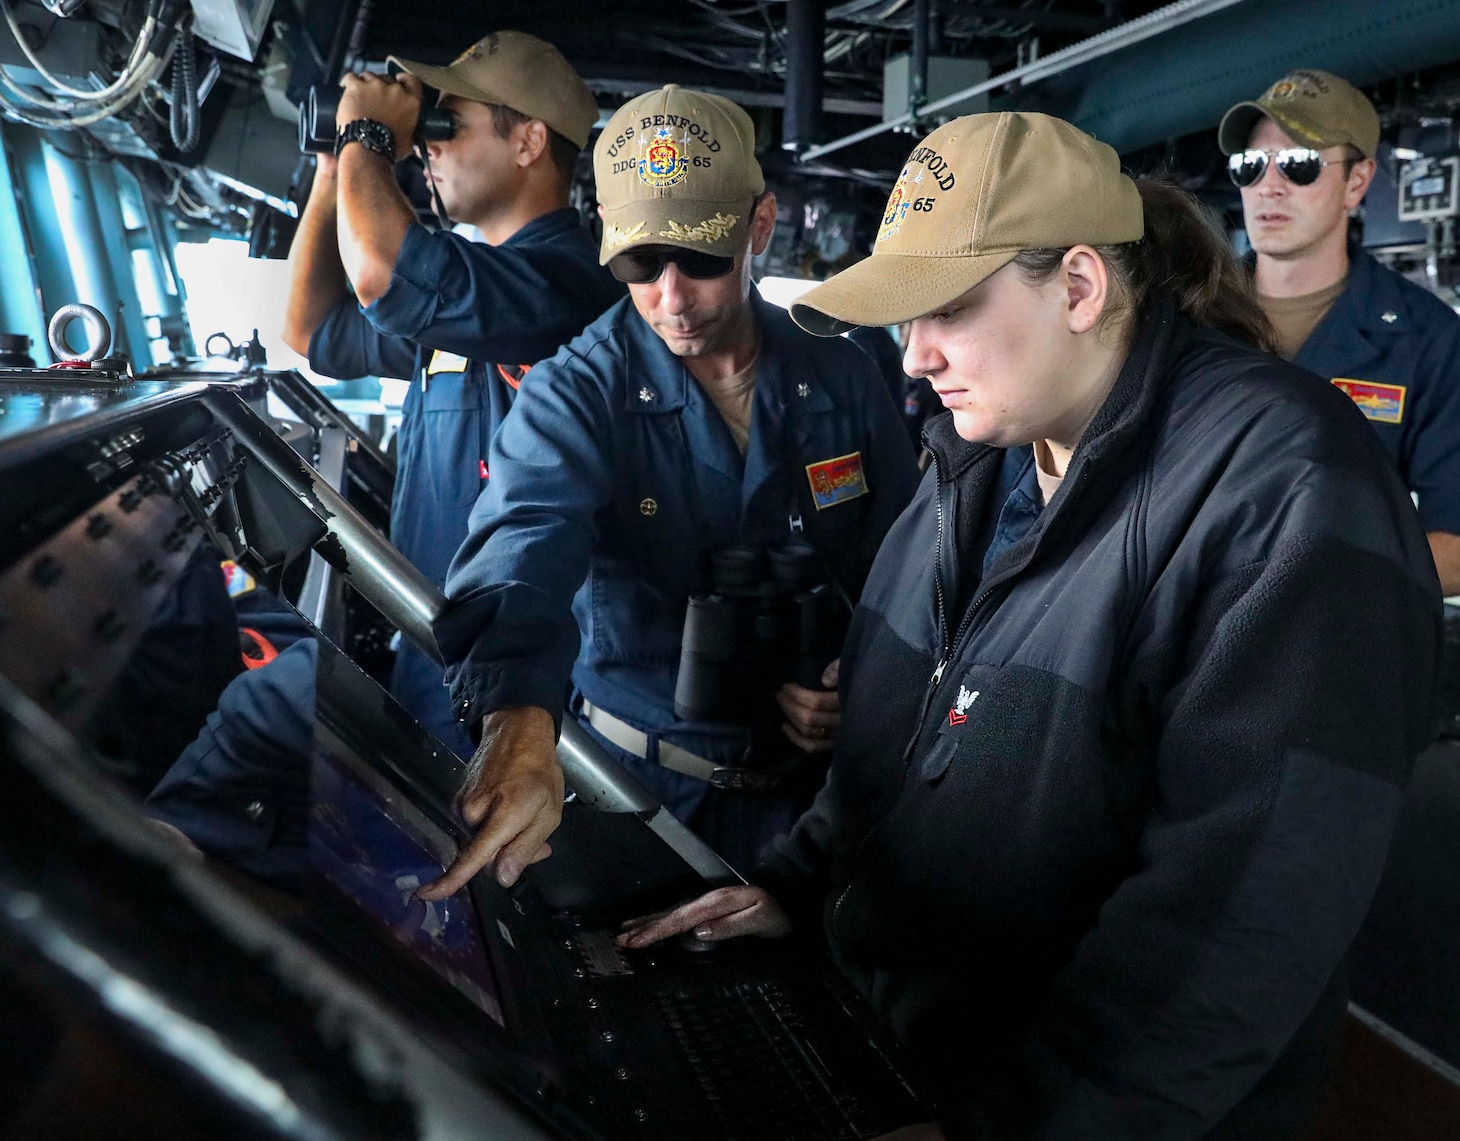 Operations Specialist 2nd Class Brittany Sopolosky monitors surface contacts from the bridge of USS Benfold (DDG 65) as the ship transits the South China Sea conducting routine underway operations.